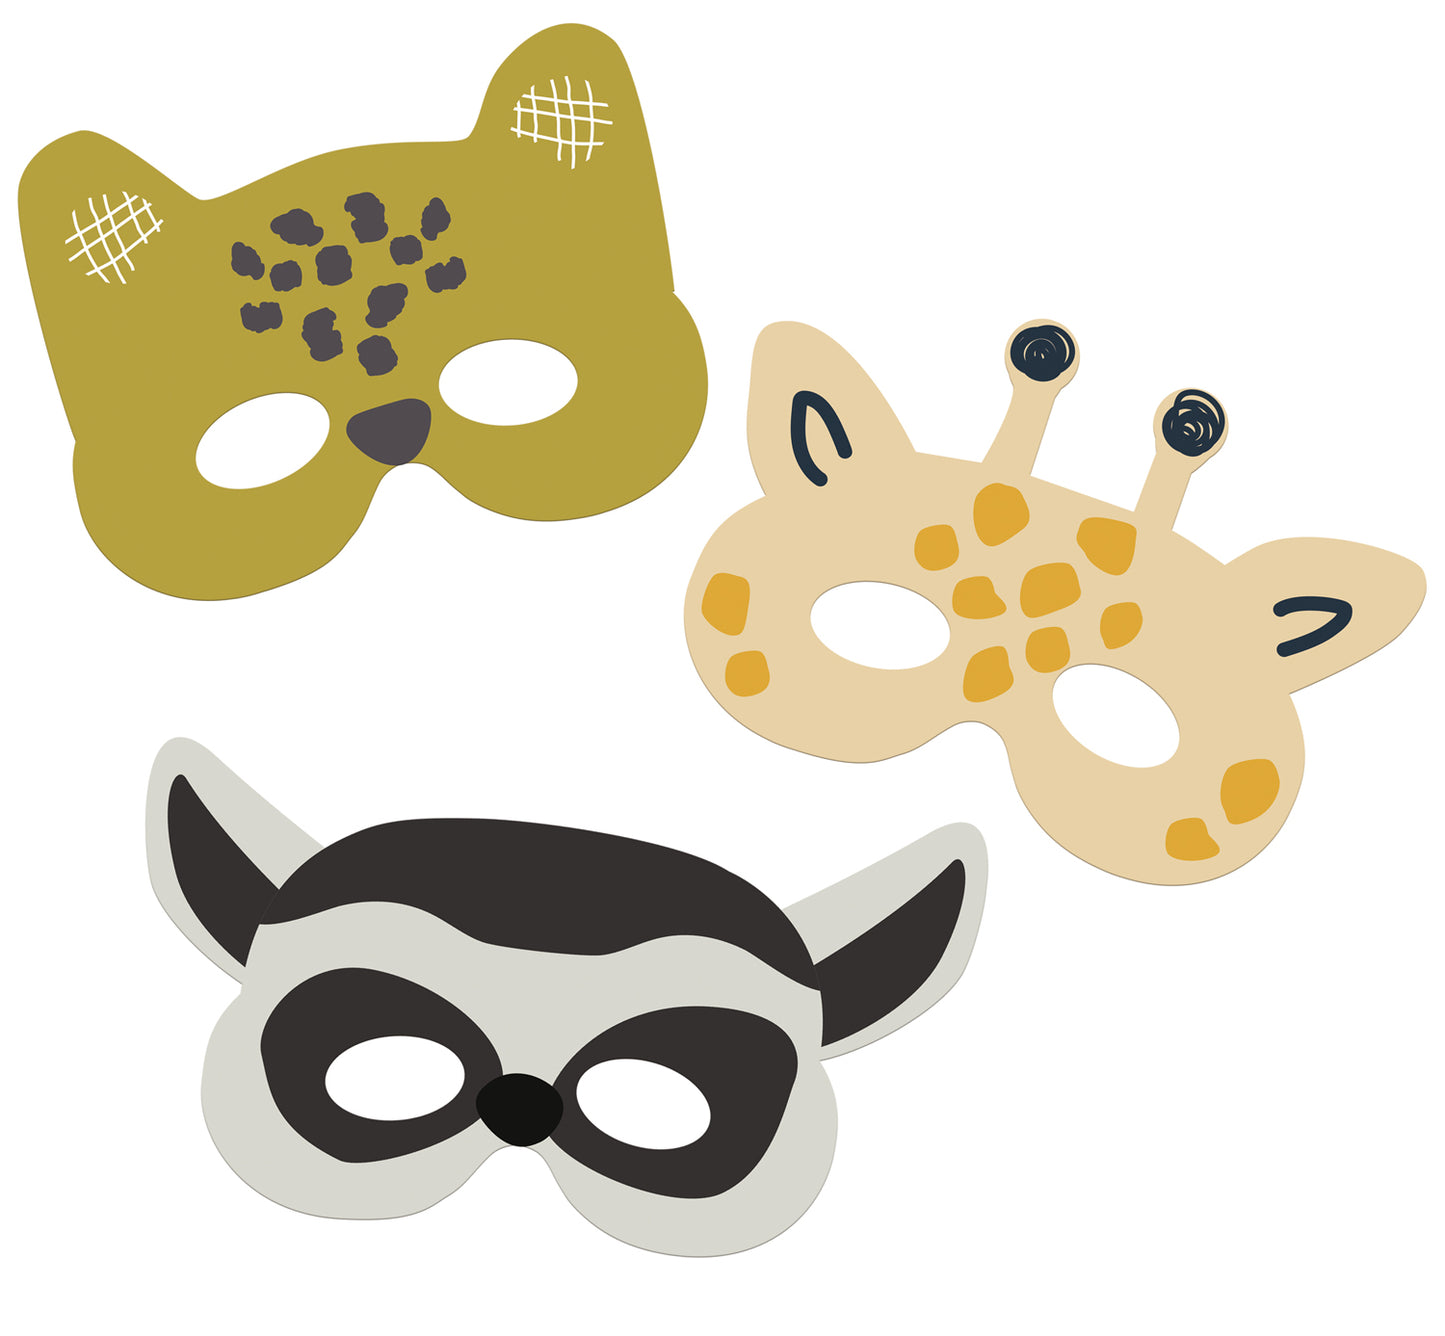 Zoo Party Maskers